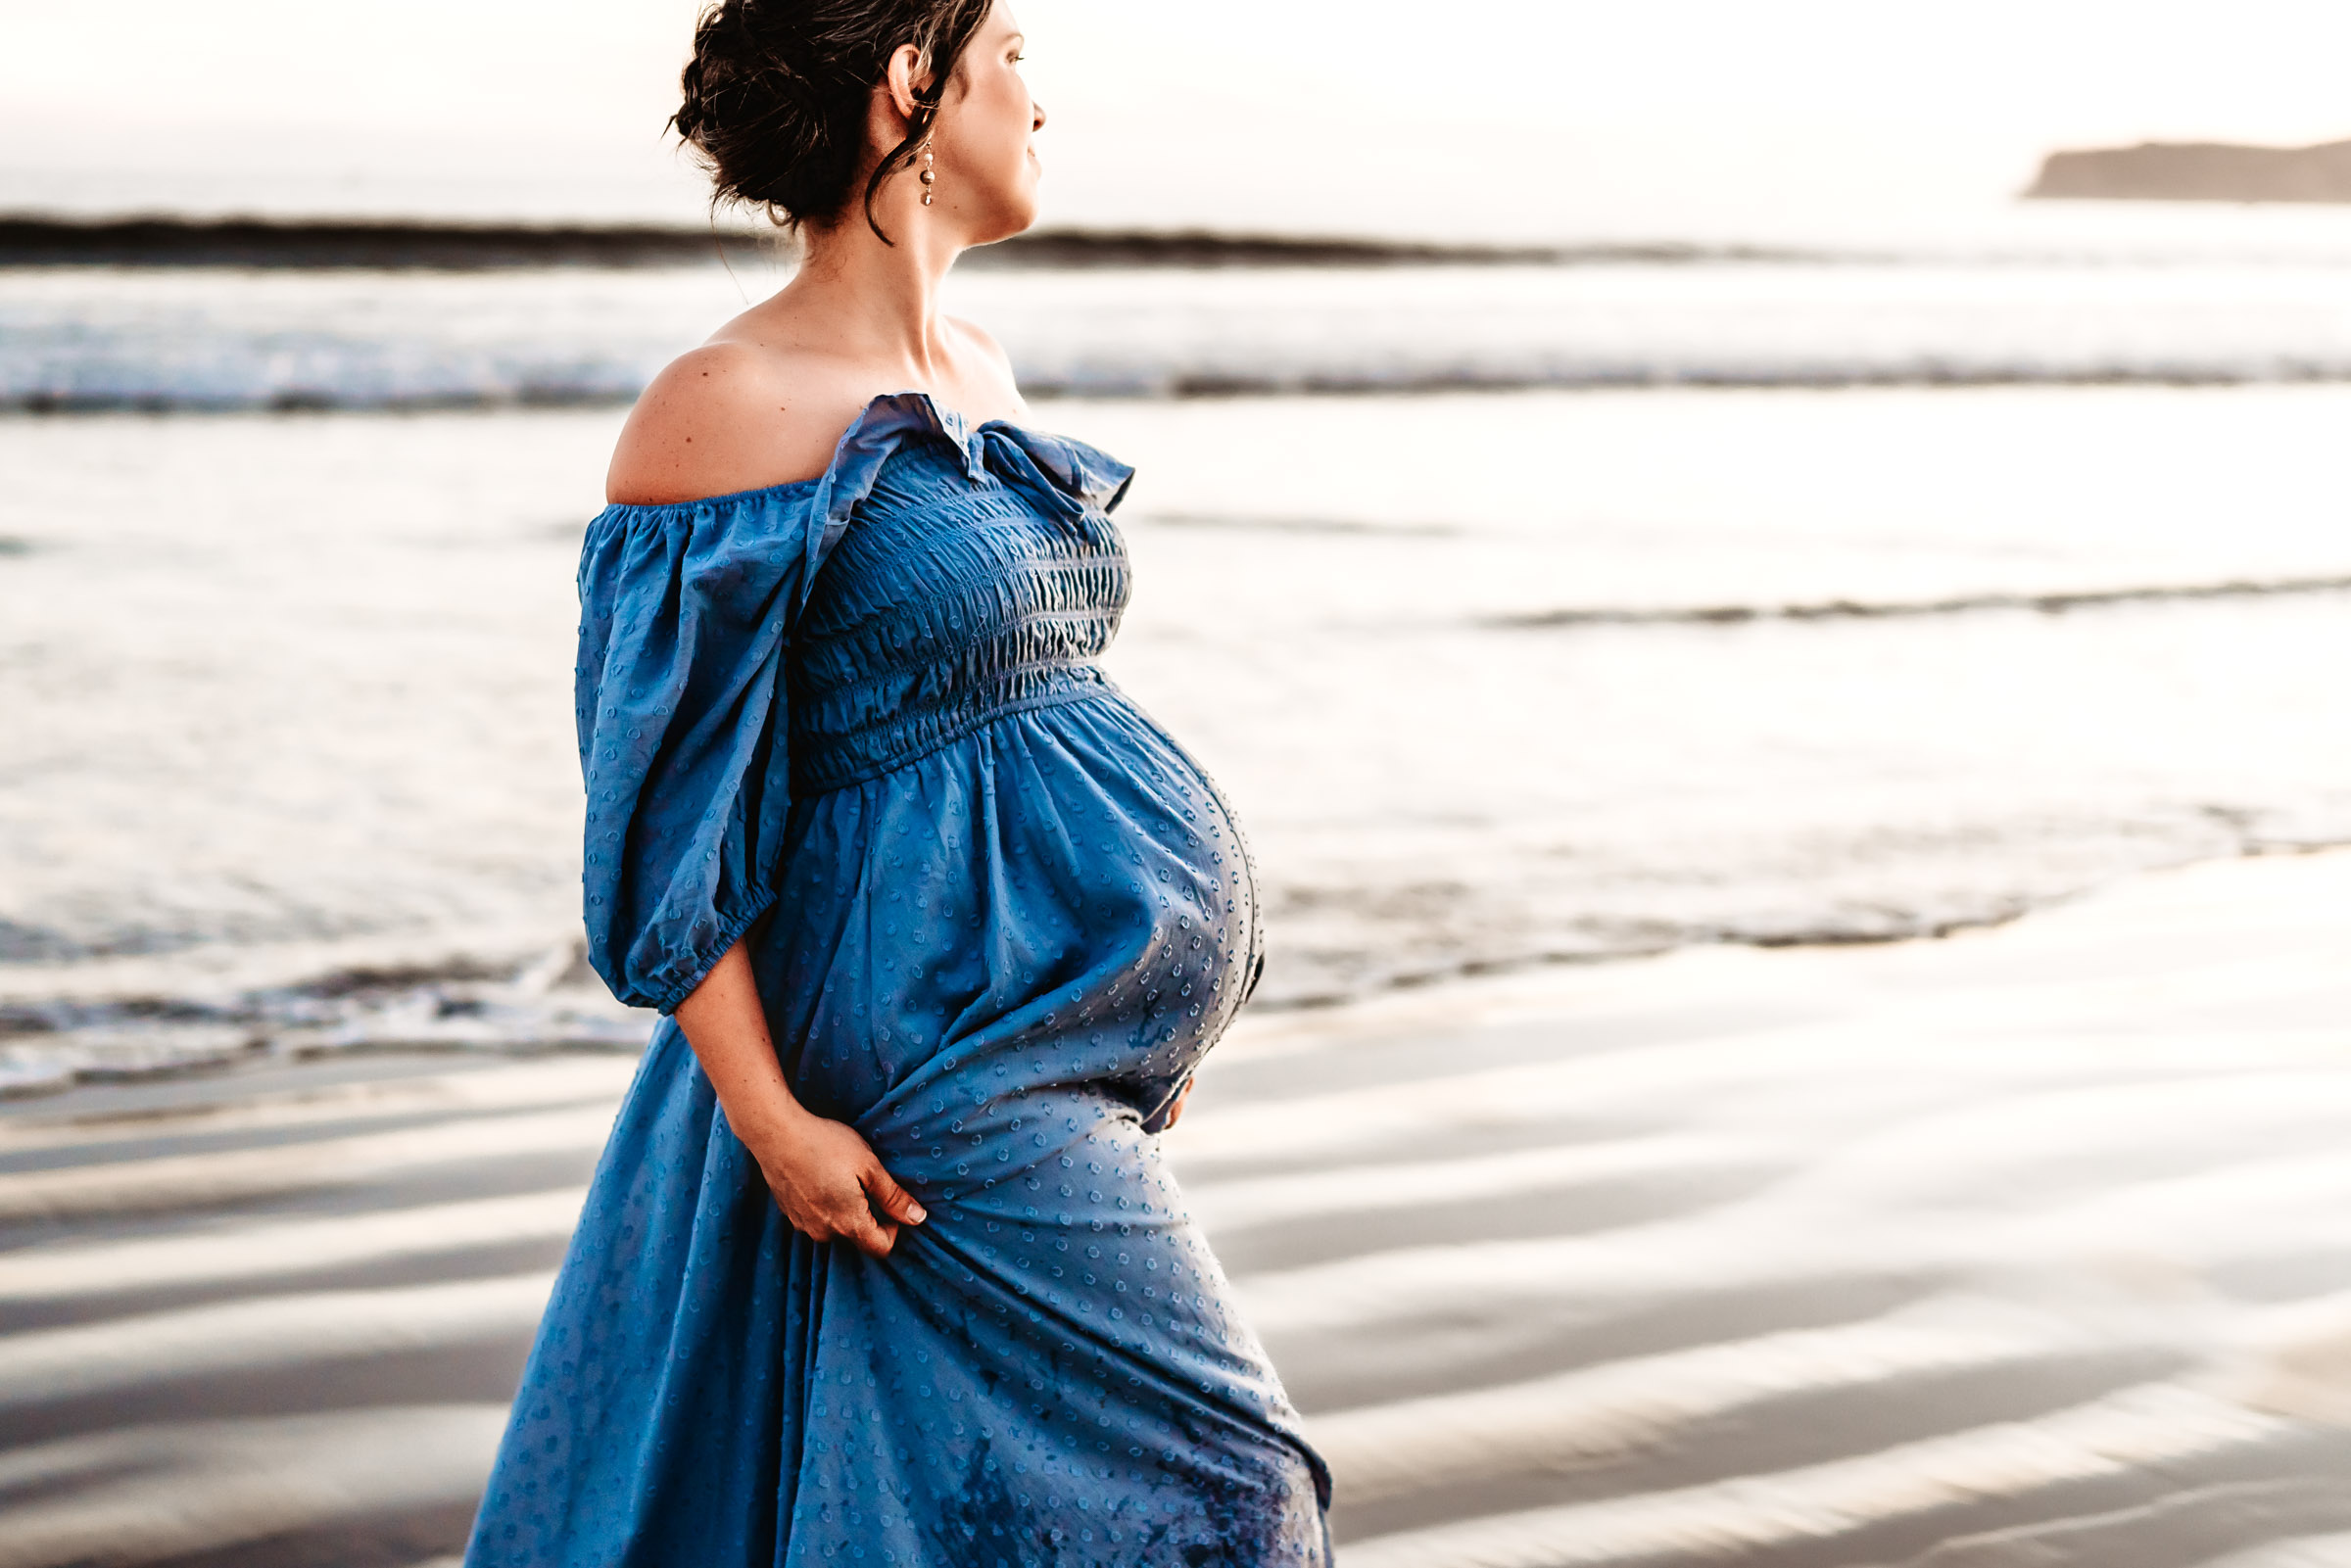 Pregnant woman holding her dress and looking at the beach sunset during a lifestyle maternity photo session on Coronado Beach.